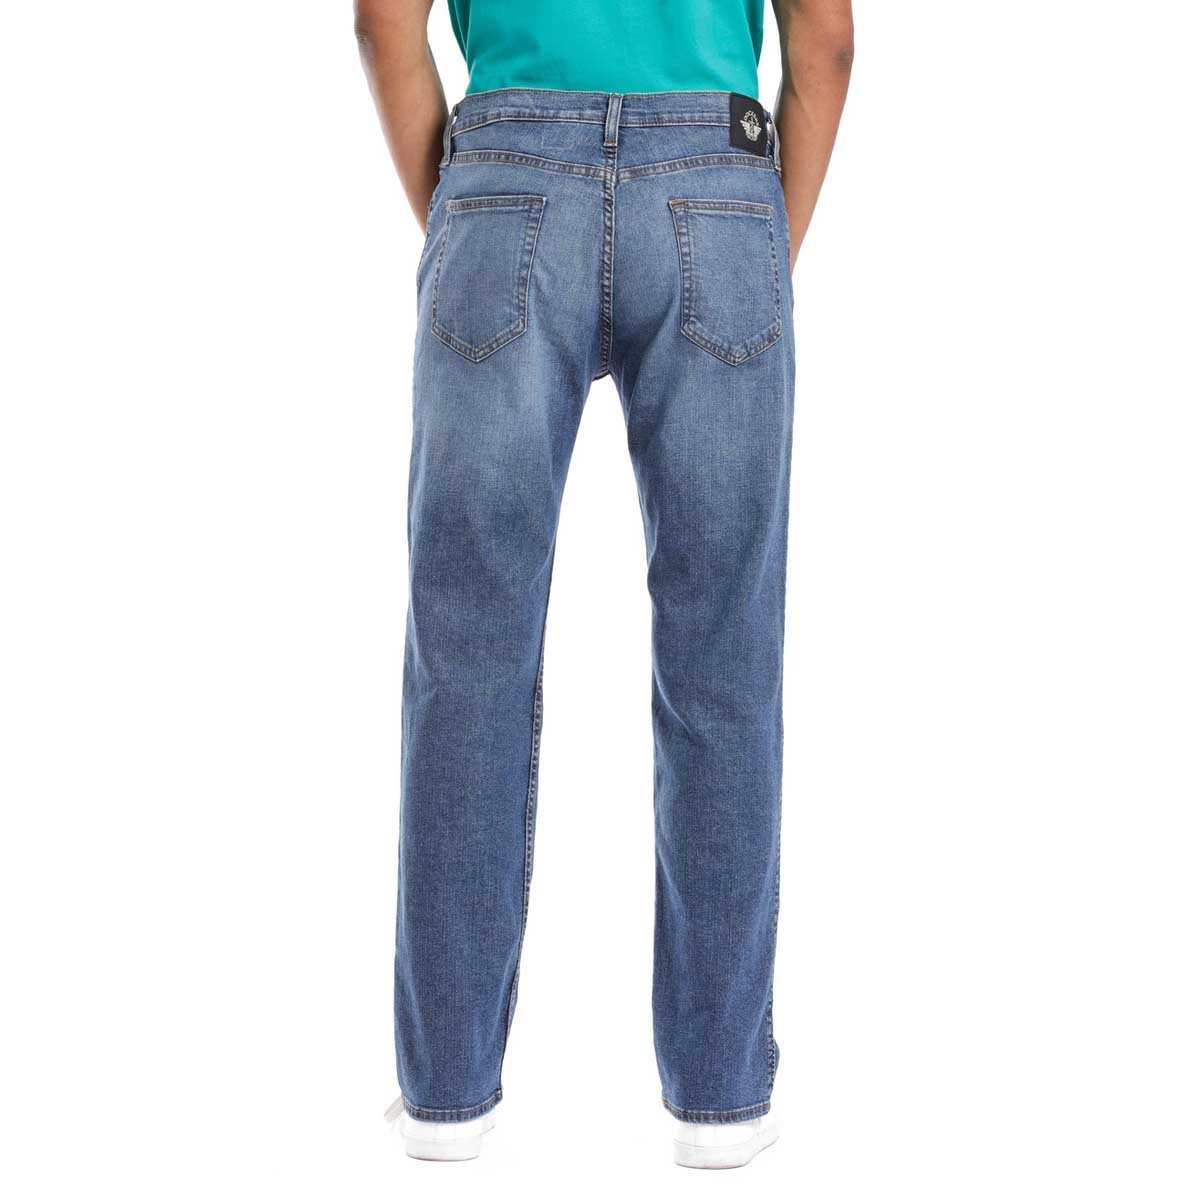 Jeans para Caballero Dockers® Straight Fit Cut